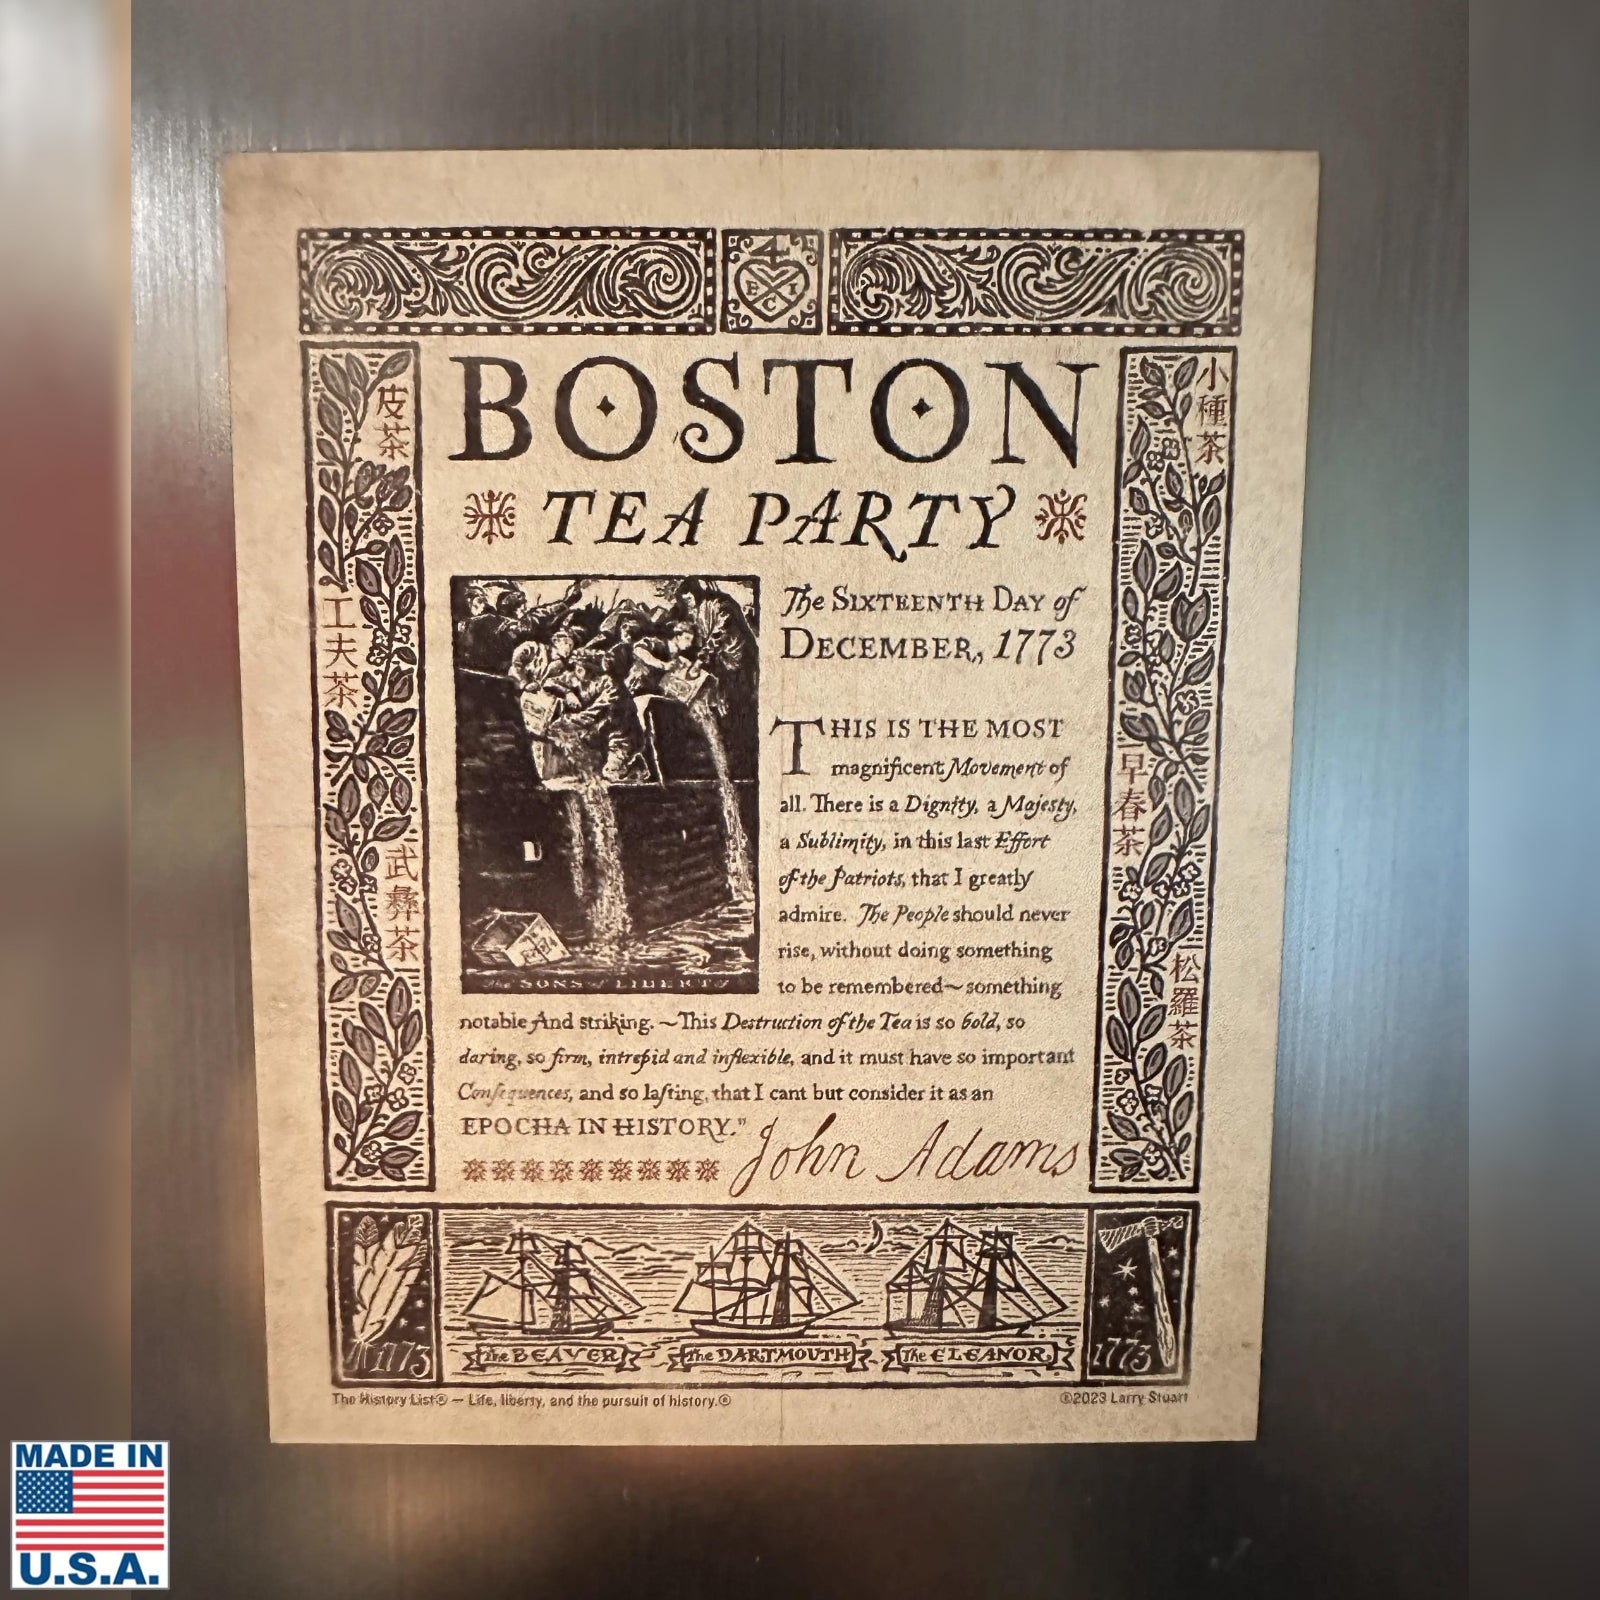 Boston Tea Party 250th Anniversary Magnet from The History List store